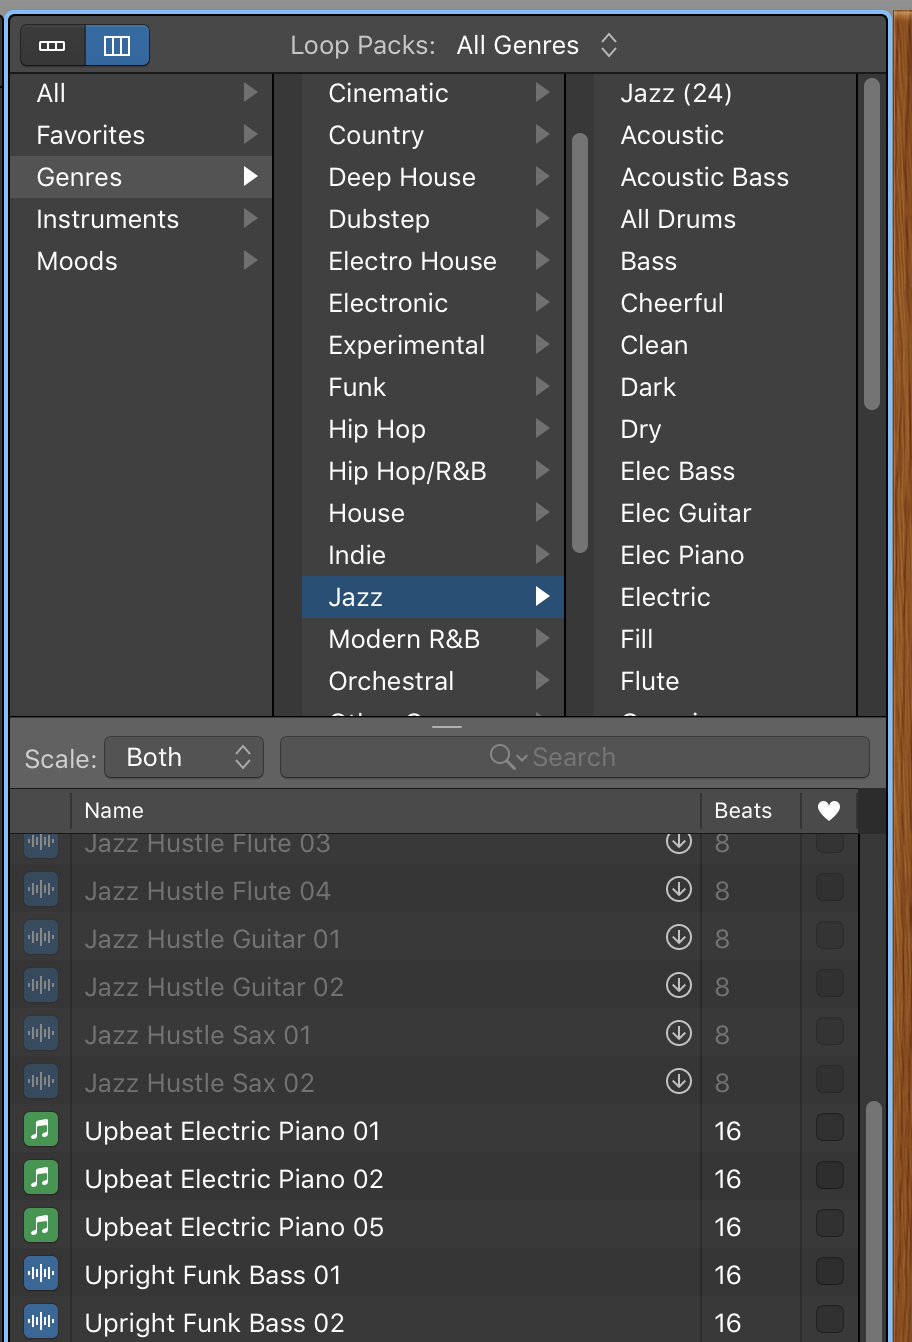 Garageband sounds and loops